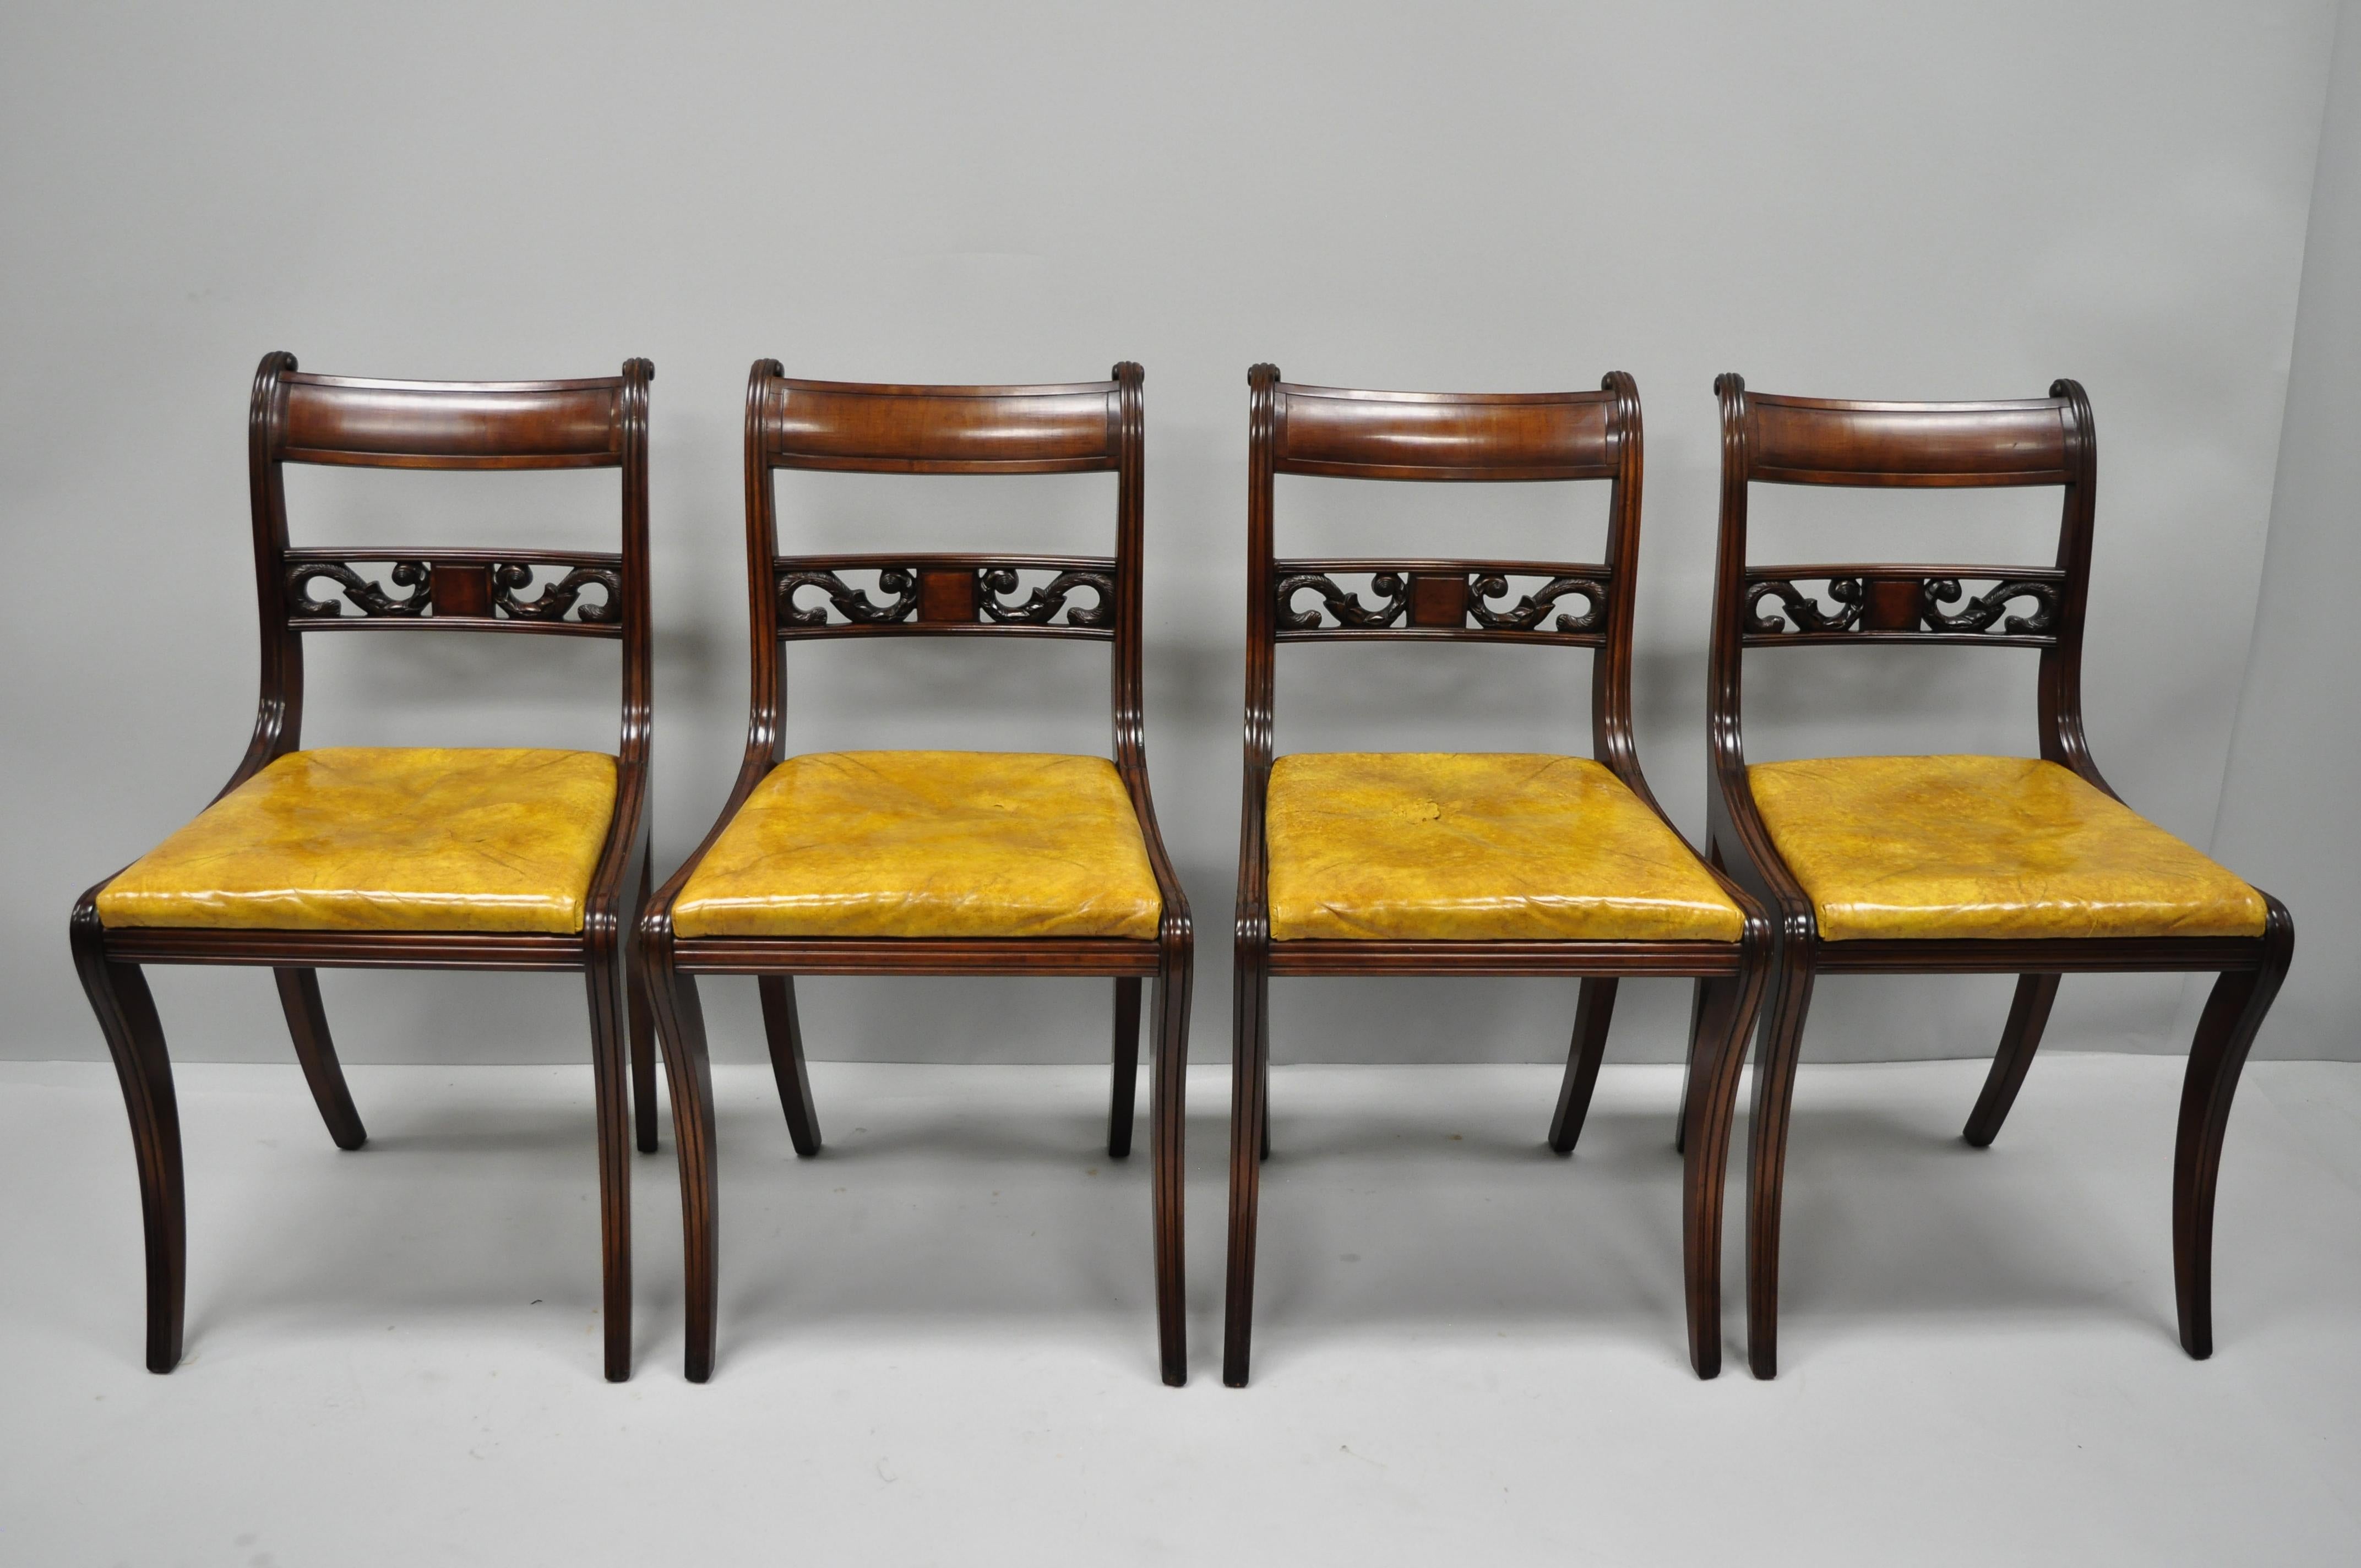 Four Mahogany Carved Plume & Acanthus Regency Style Saber Leg Dining Side Chairs 12